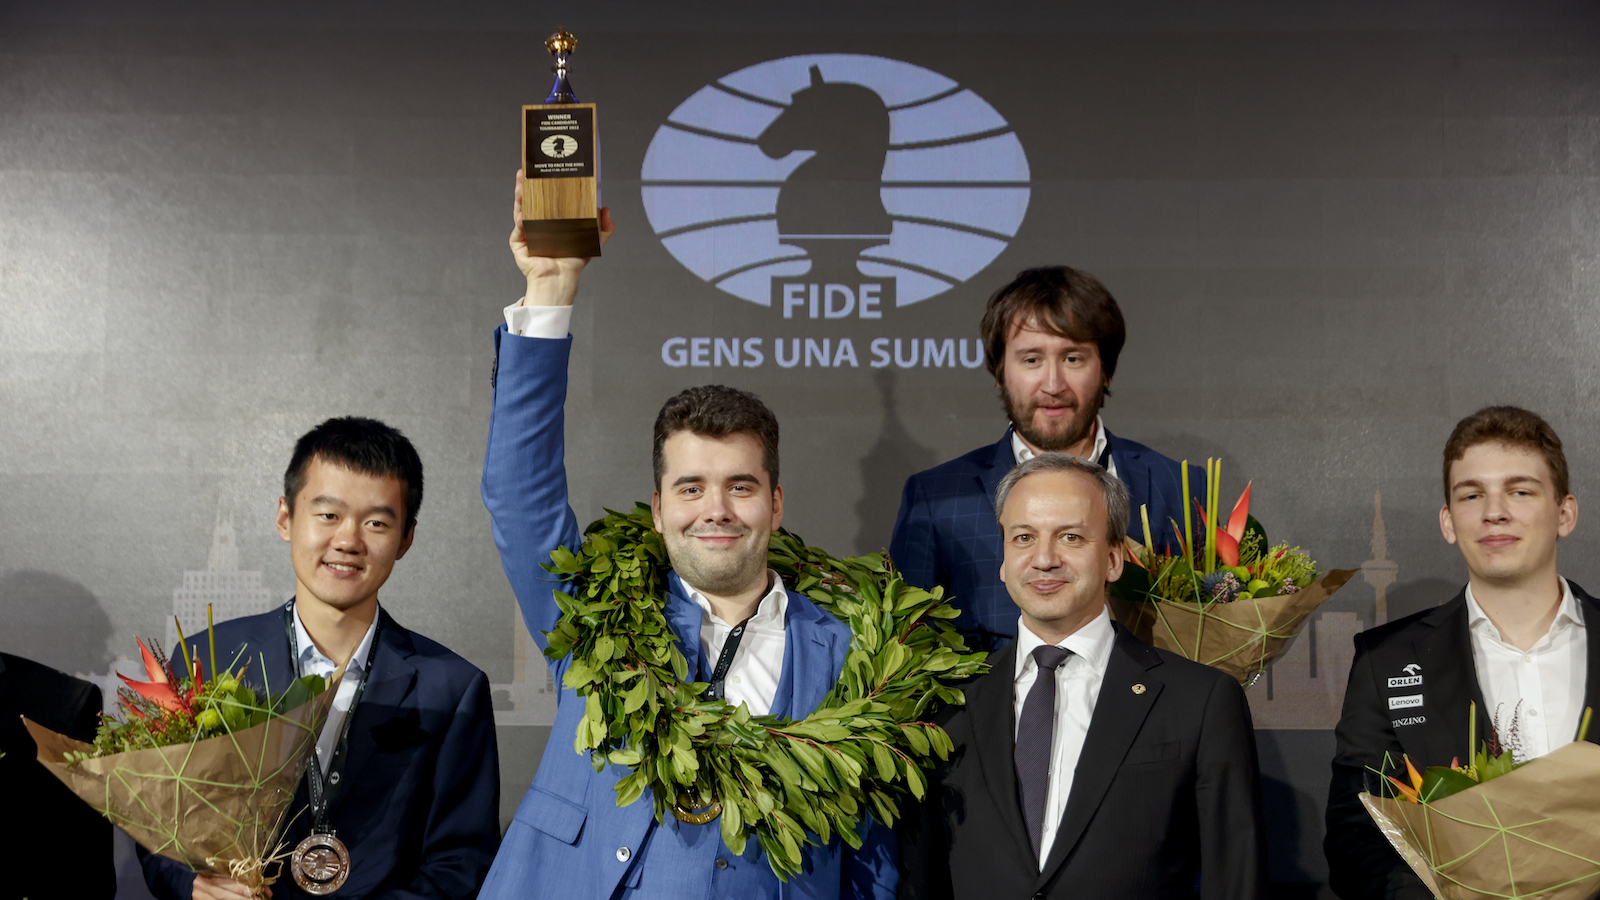 MADRID, SPAIN - JULY 5: Russian Grandmaster competing under the FIDE flag Ian Nepomniachtchi receives the award as the winner of the competition (2nd from L) with Ding Liren of China, FIDE President Arkady Dvorkovich, Teimour Radjabov of Azerbaiyán and Jan-Krzysztof Duda of Poland during the 2022 FIDE Chess Candidates Tournament closing ceremony on July 5, 2022 in Madrid, Spain. (